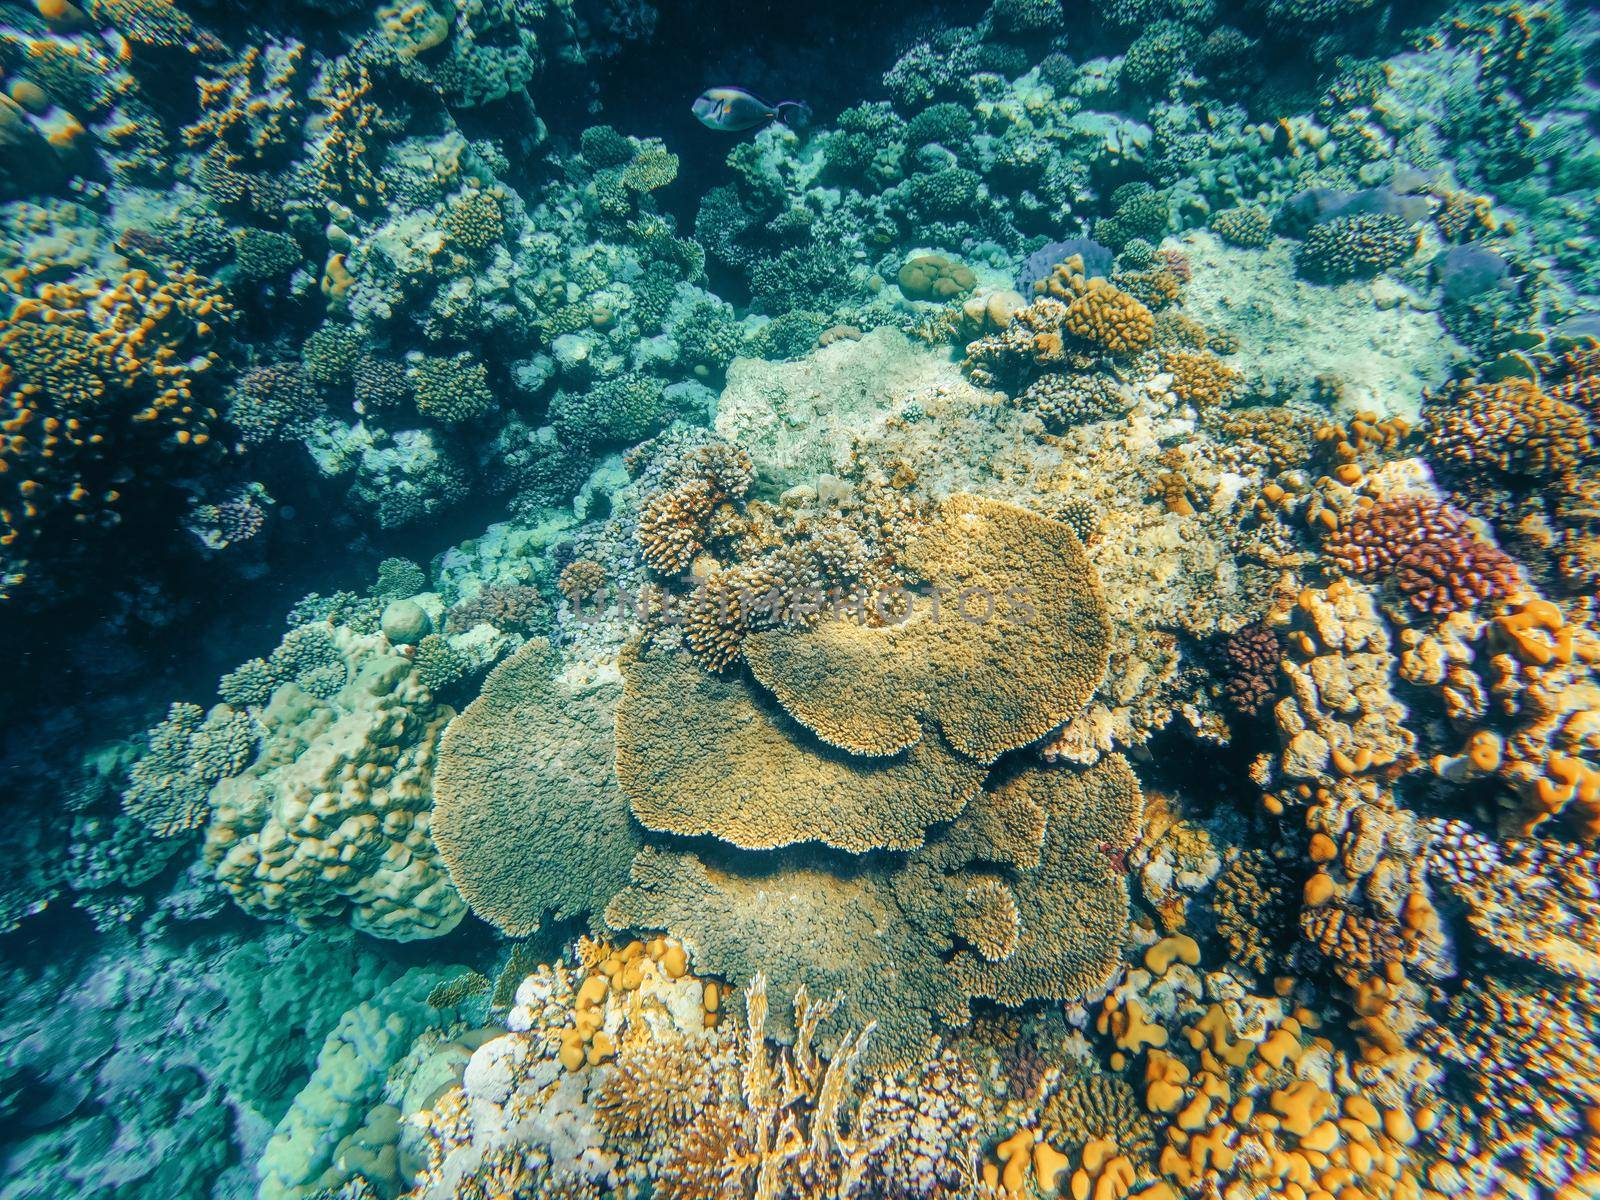 Underwater landscape, beautiful diversity of colorful coral reef garden and fish in amazing red sea, Marsa Alam, Egypt